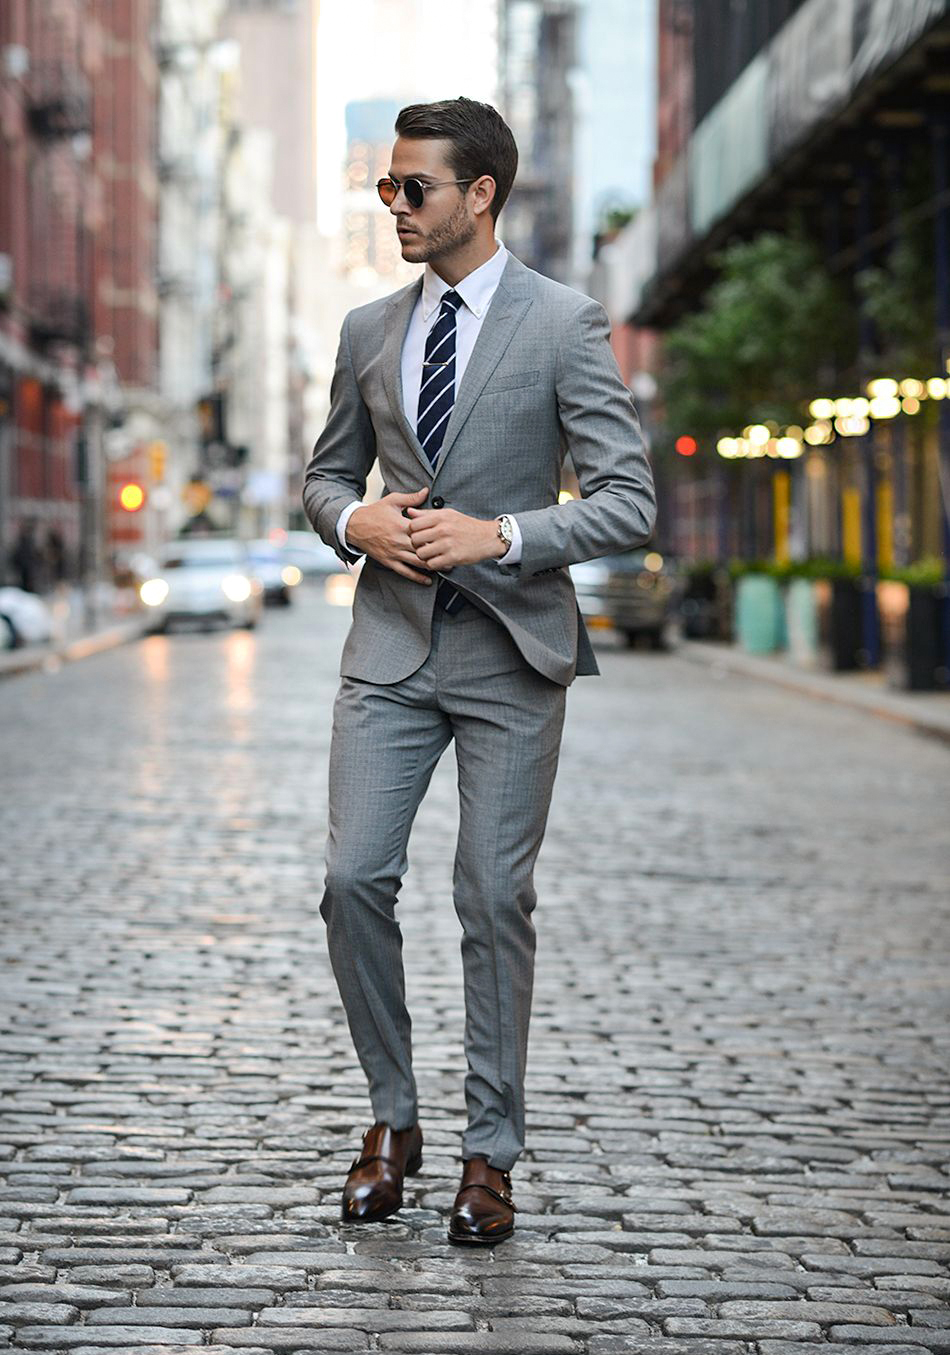 Light grey suit, white shirt, and brown shoes color combination